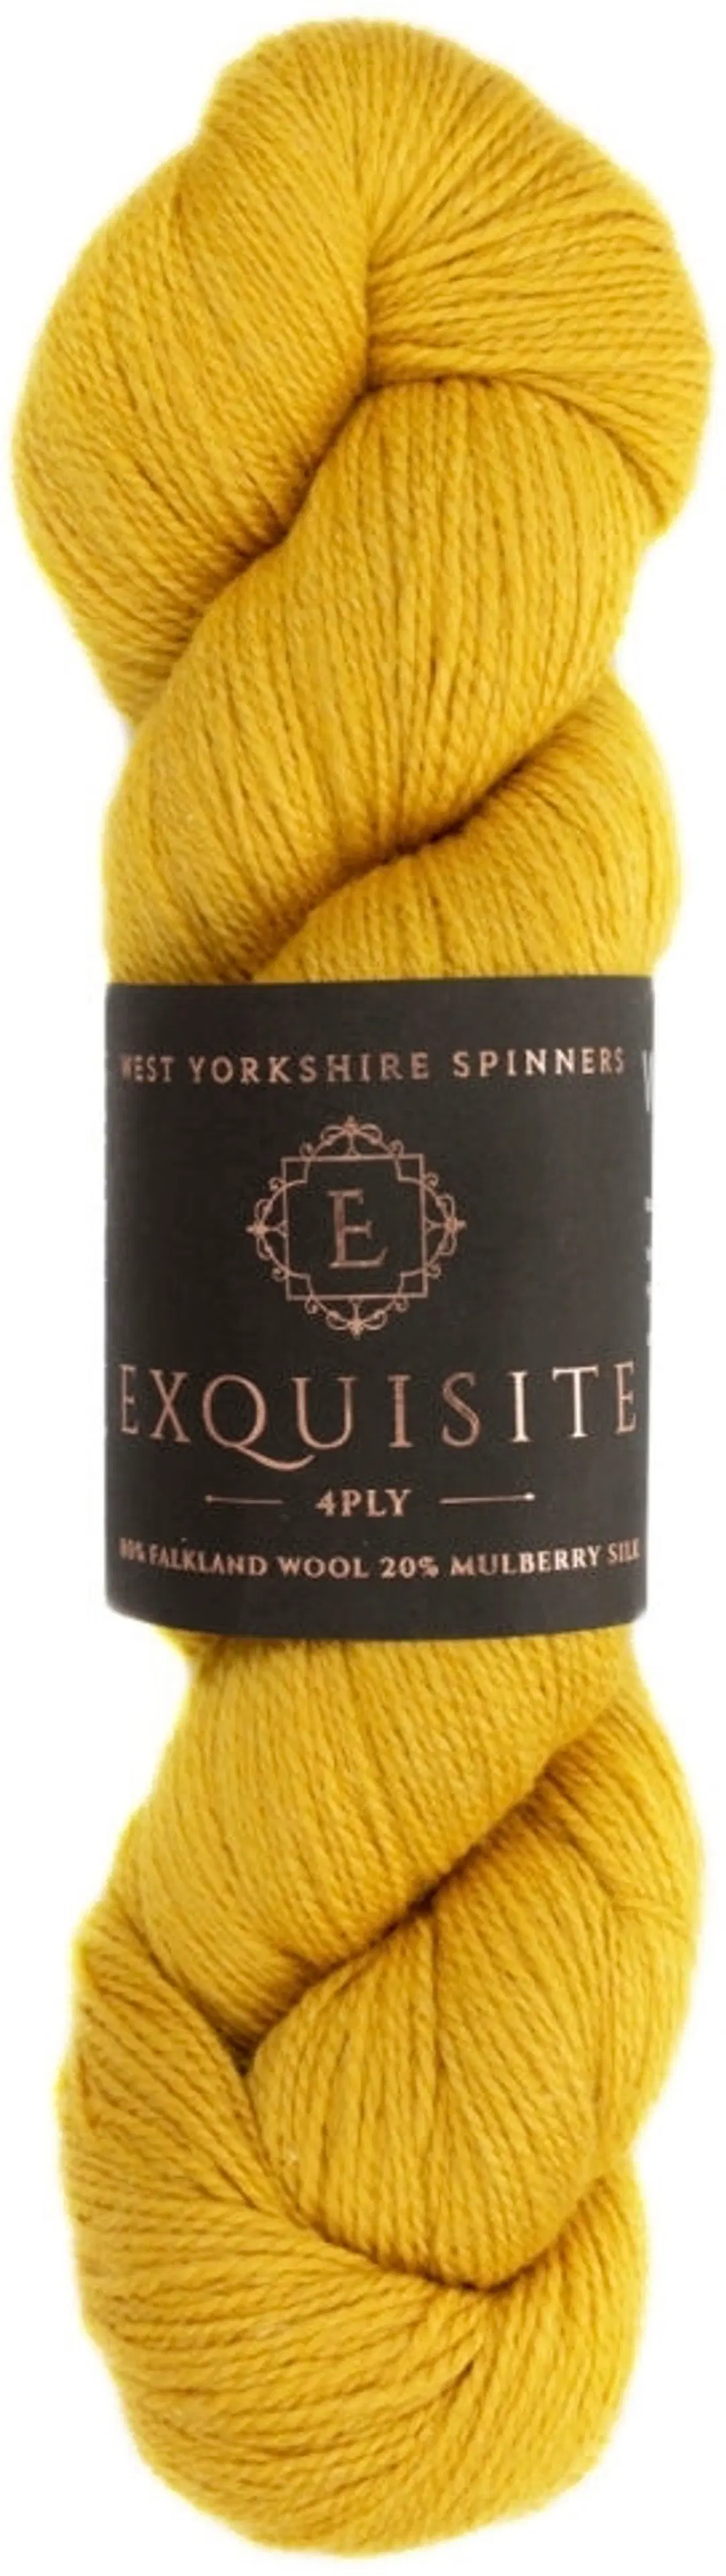 West Yorkshire Spinners lanka Exquisite 4PLY 100g Tuscany 369